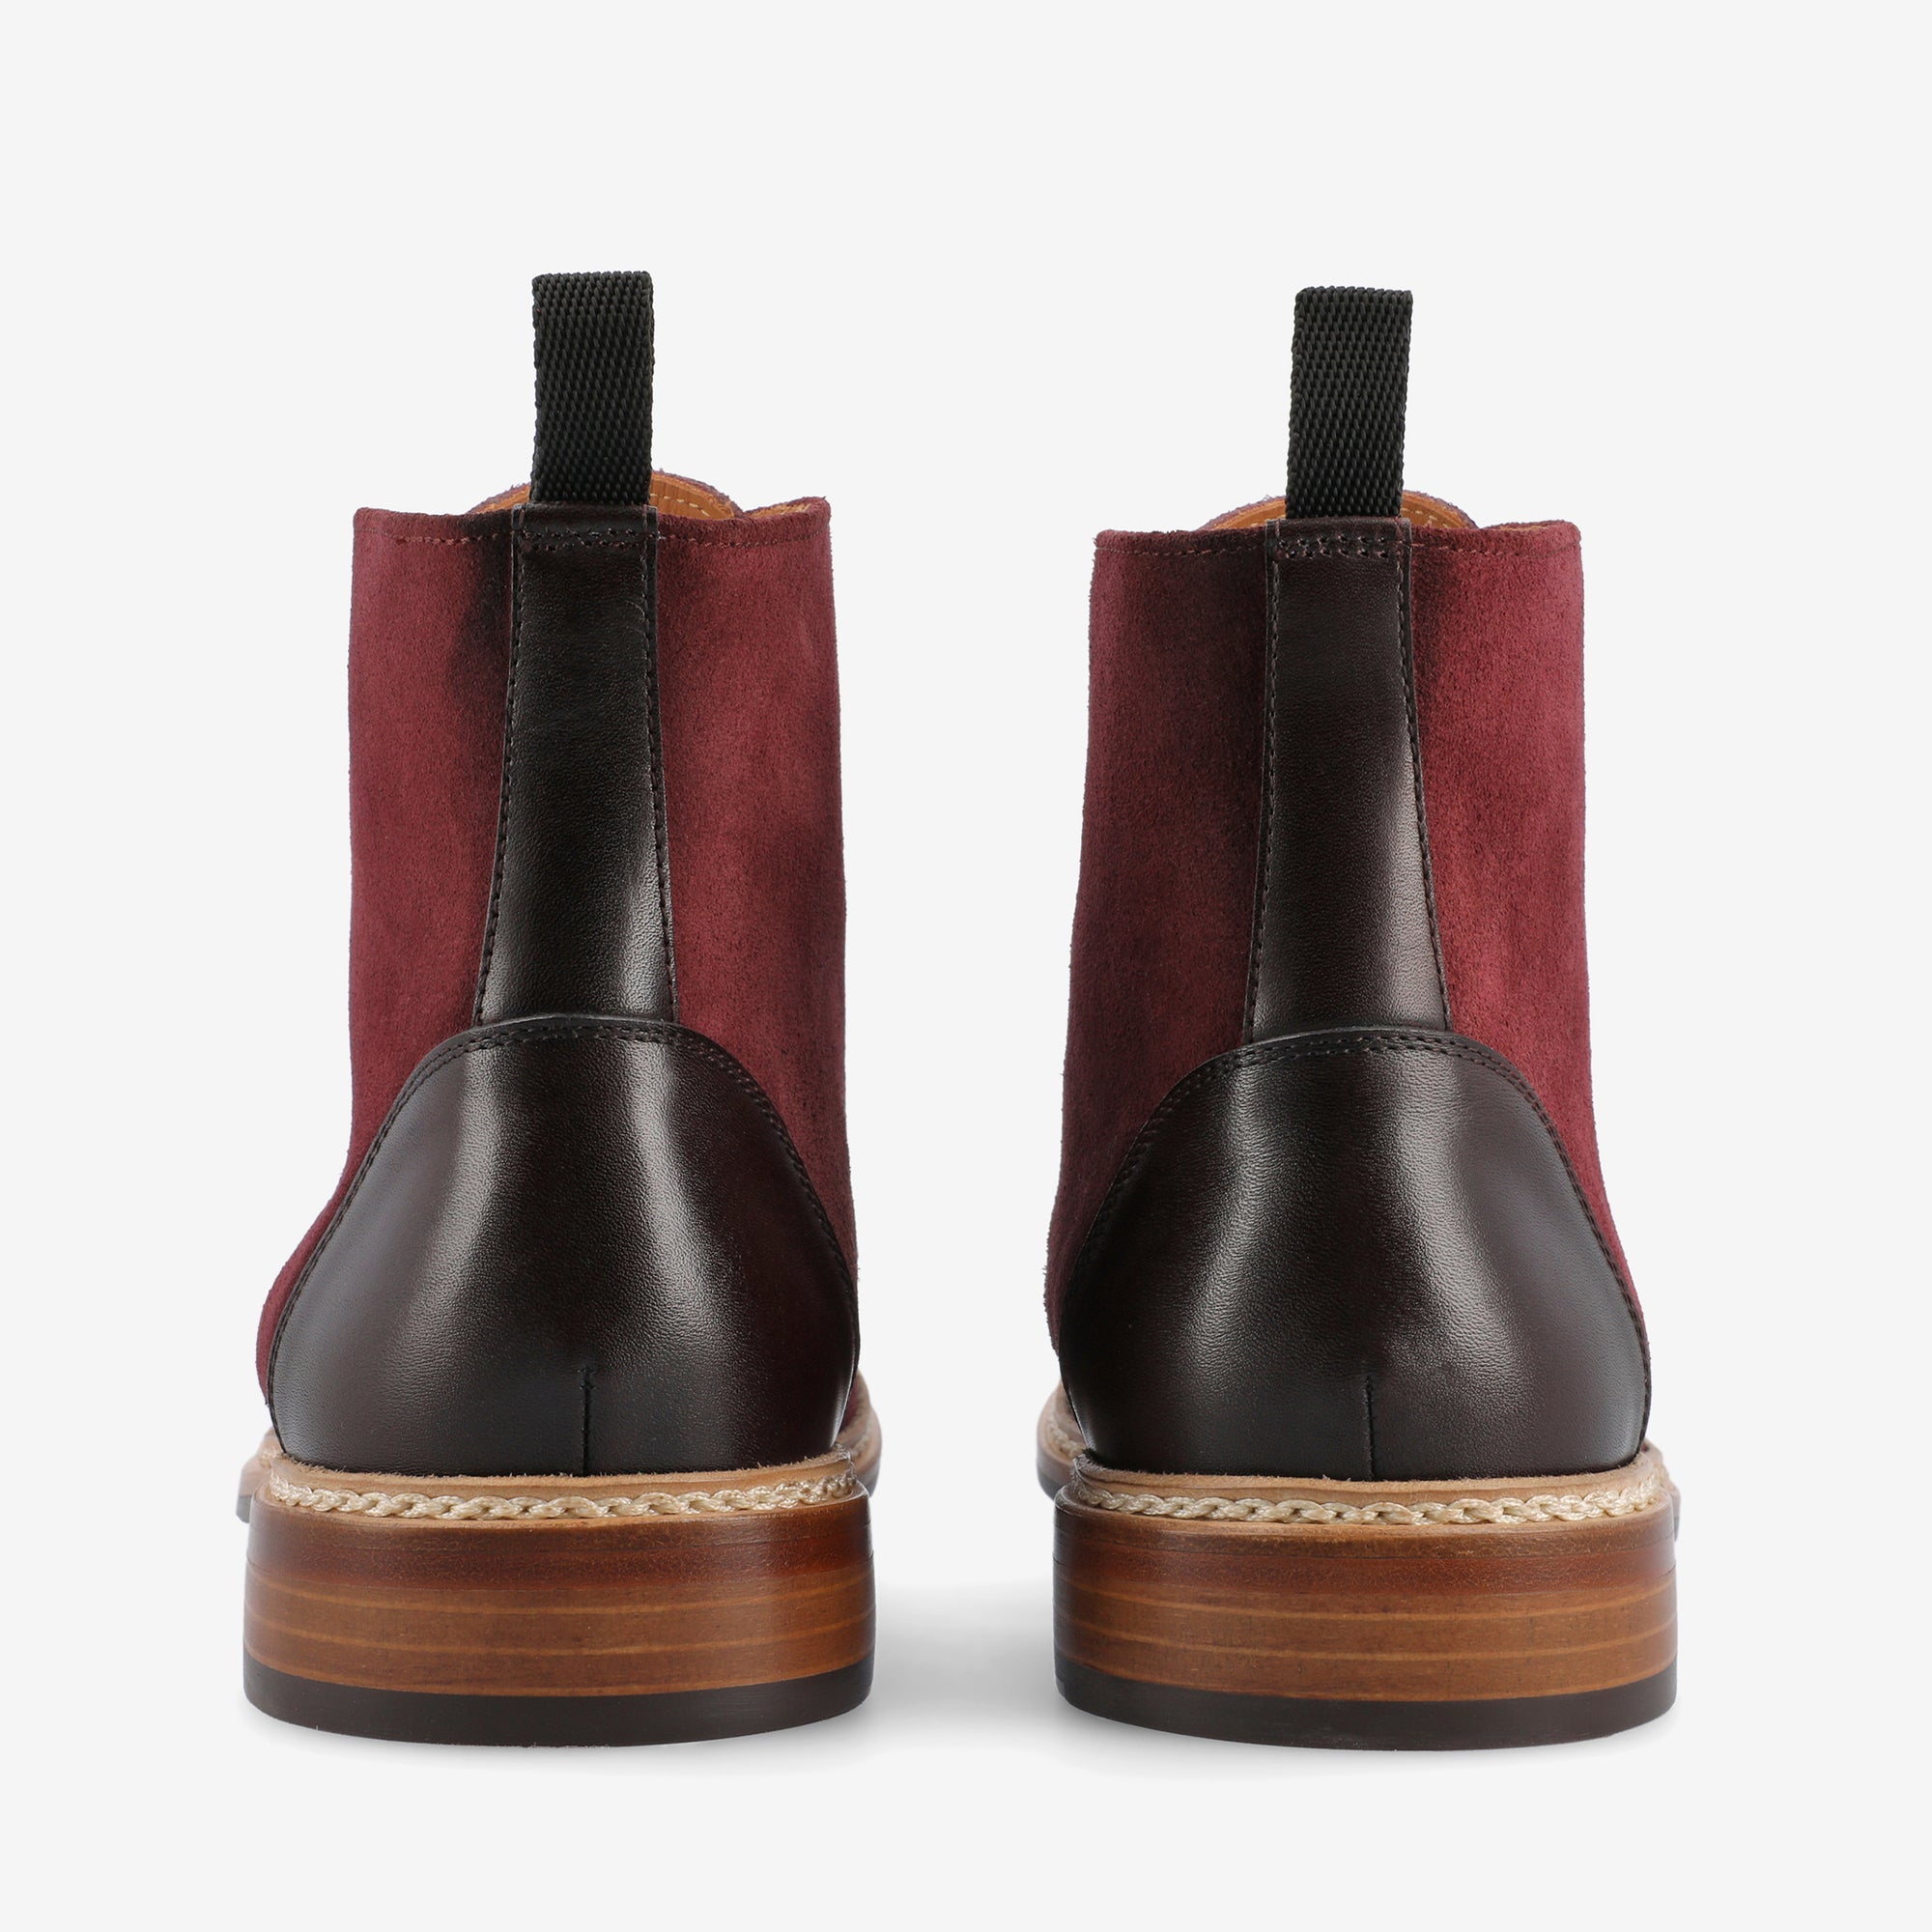 The Troy Boot in Oxblood